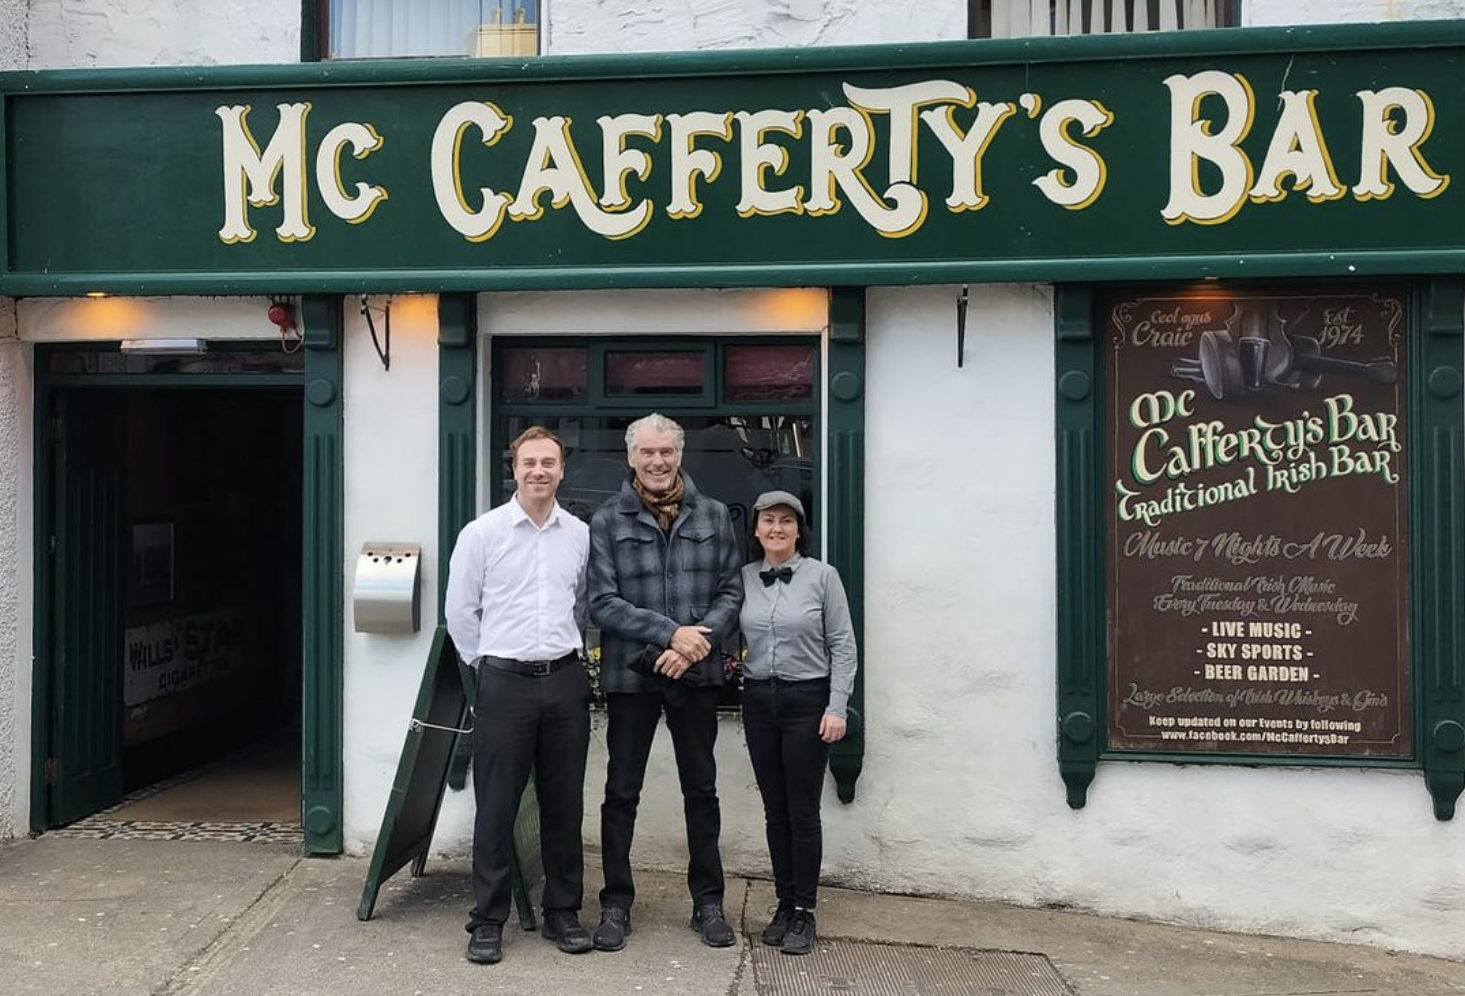 Pierce Brosnan posing for a picture with staff outside McCafferty's Bar in Donegal